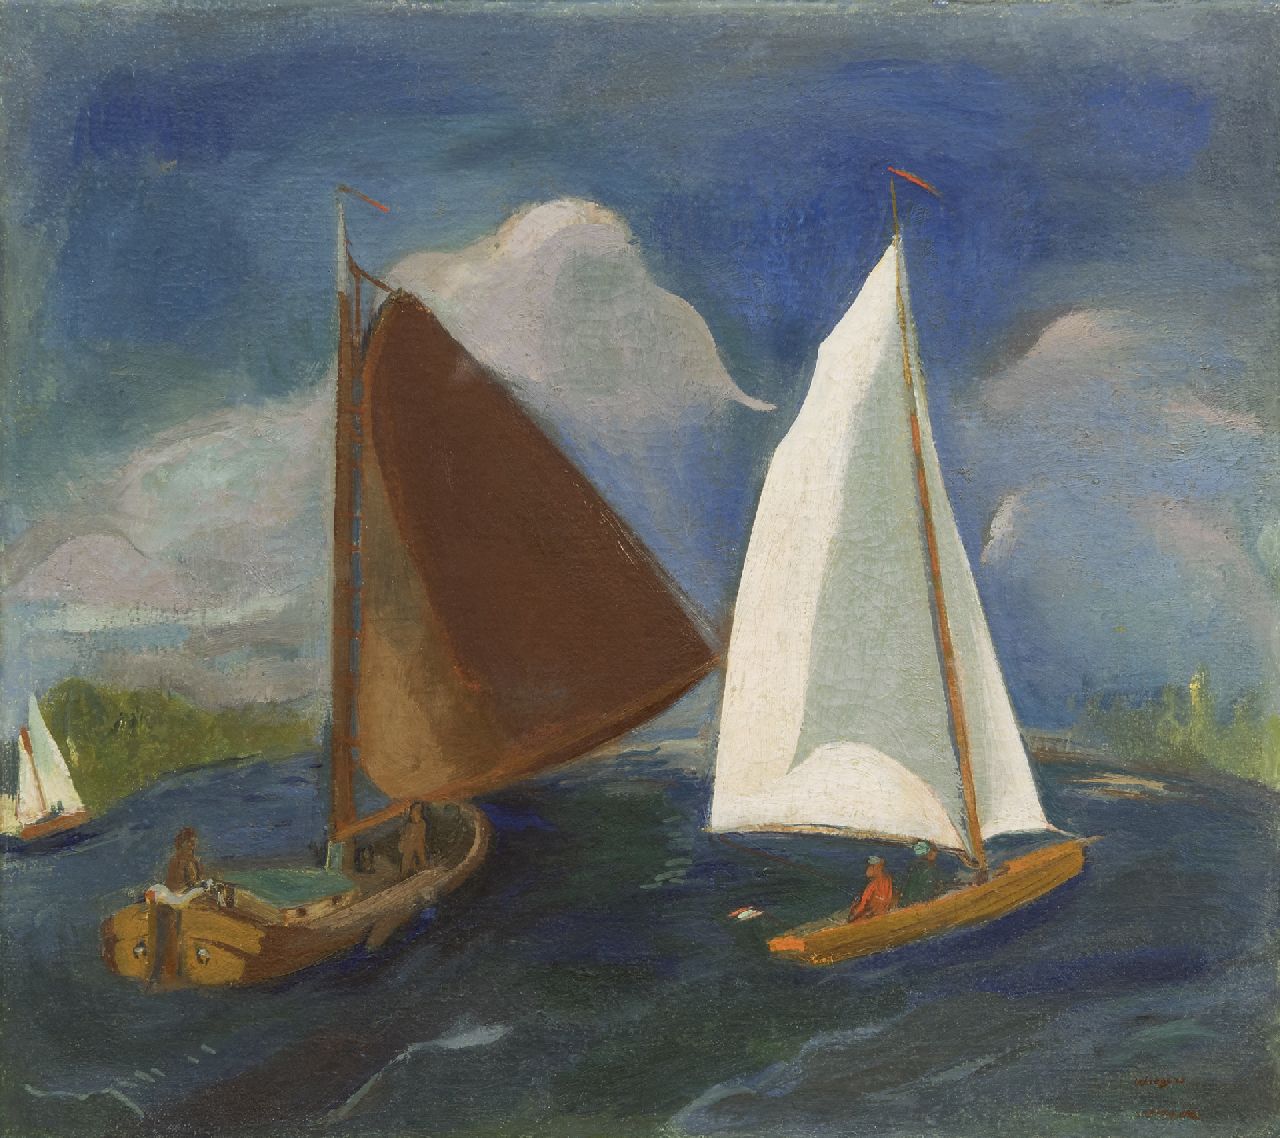 Wiegers J.  | Jan Wiegers, Sailing boats on the Paterswoldsemeer, wax paint on canvas 45.5 x 50.4 cm, signed l.r. (twice) and painted ca. 1931